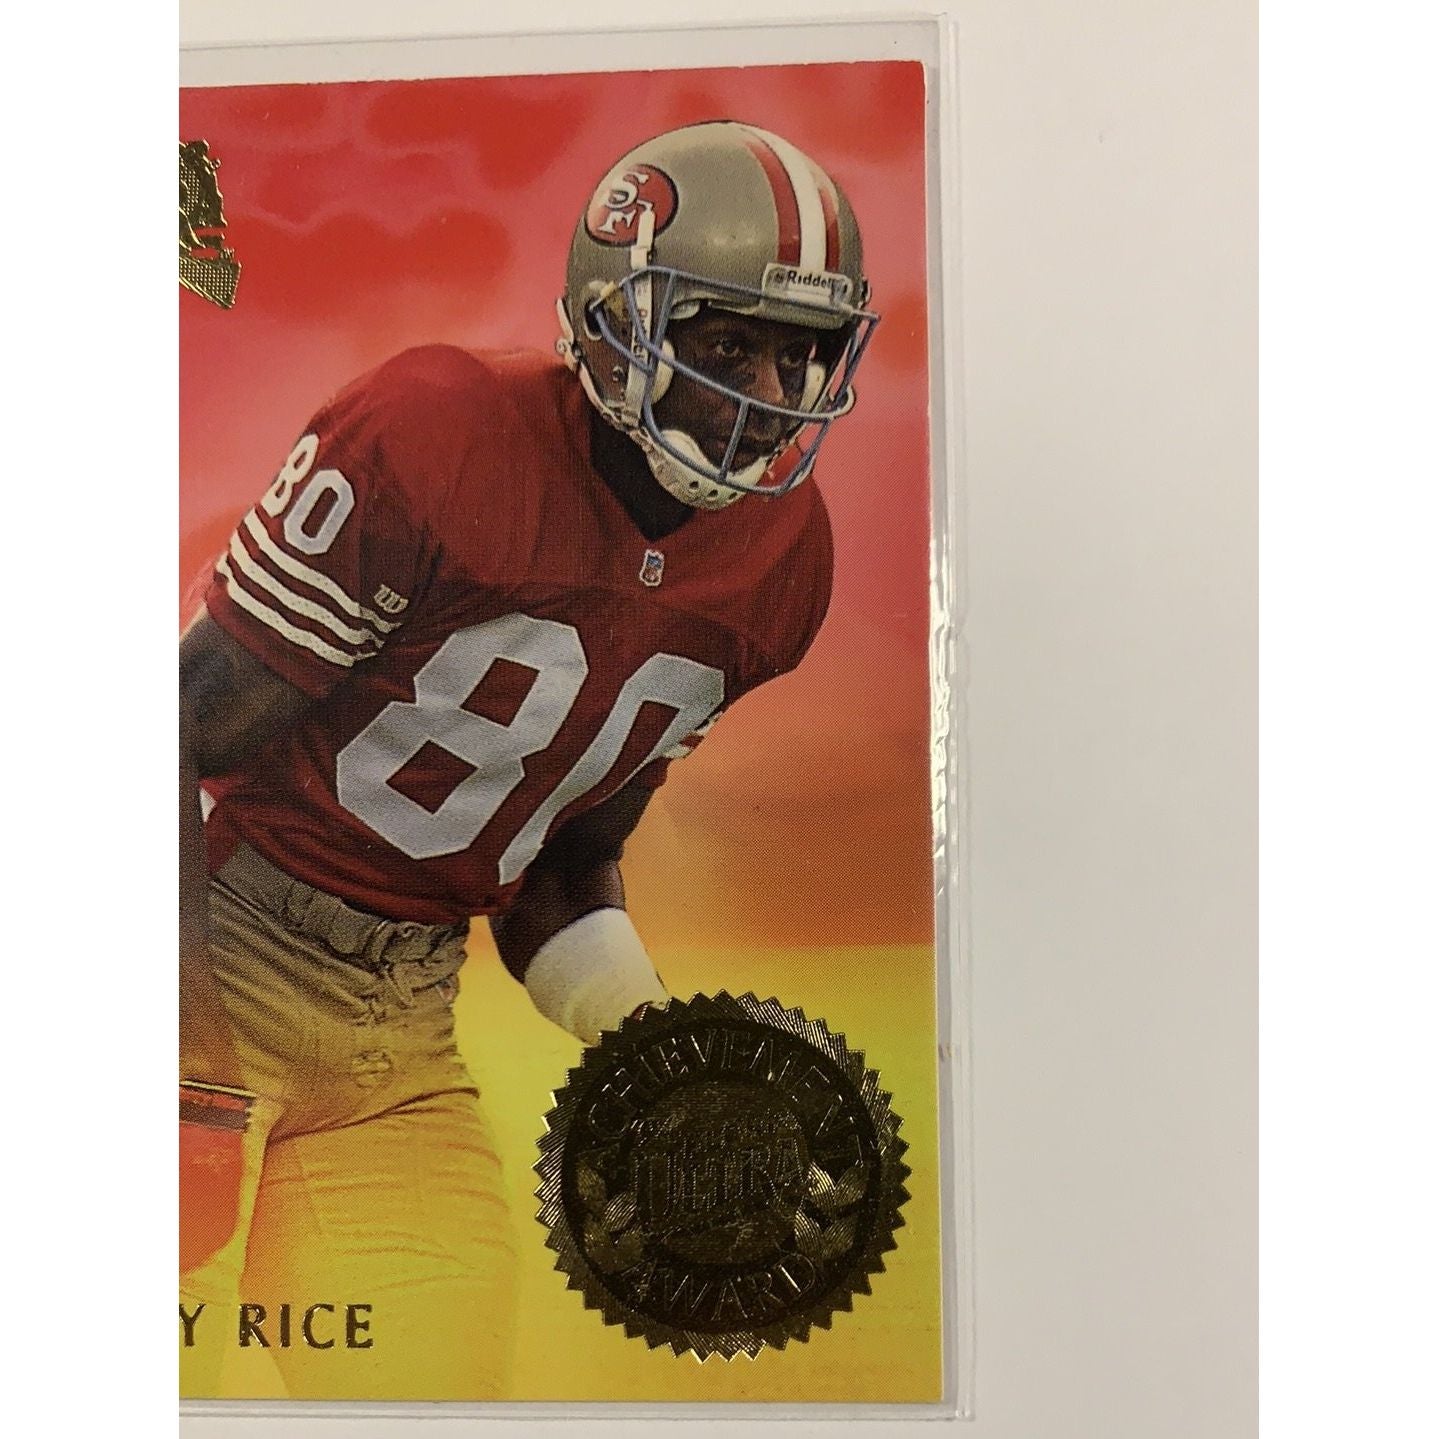  1994 Fleer Ultra Jerry Rice Achievement Award  Local Legends Cards & Collectibles